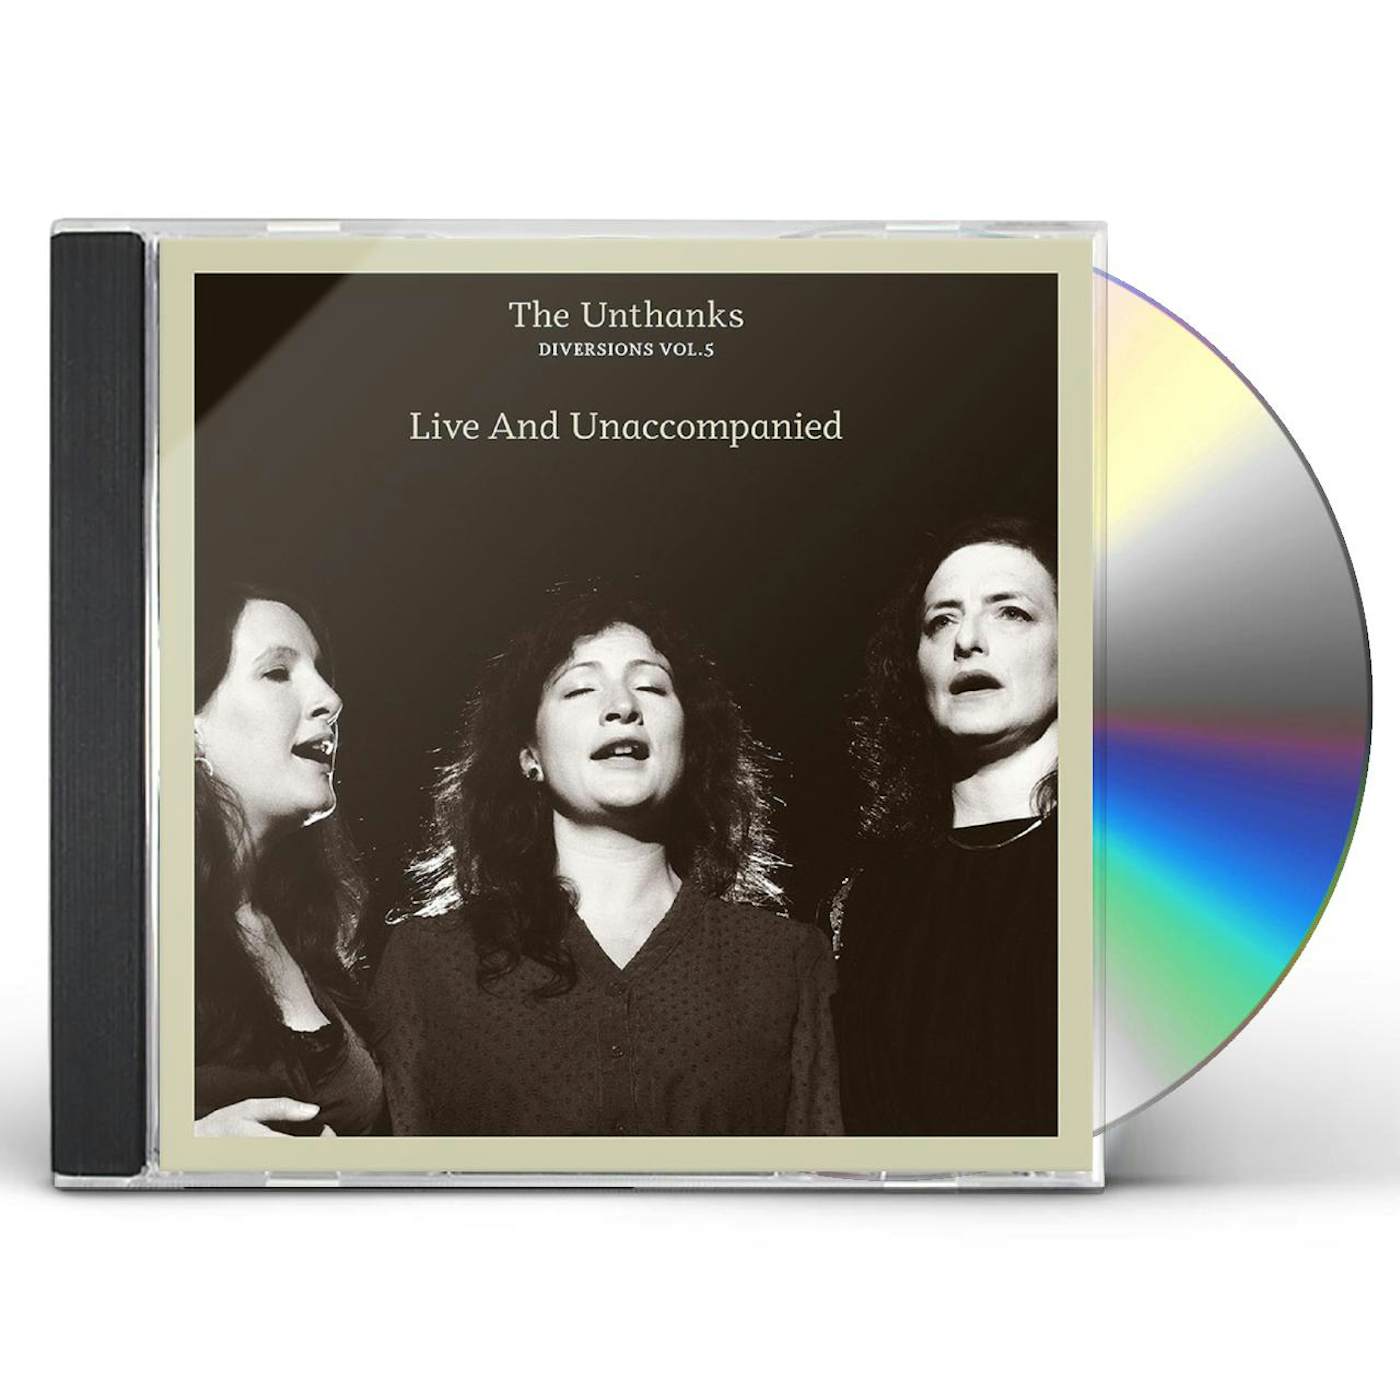 The Unthanks DIVERSIONS VOL.5: LIVE AND UNACCOMPANIED CD